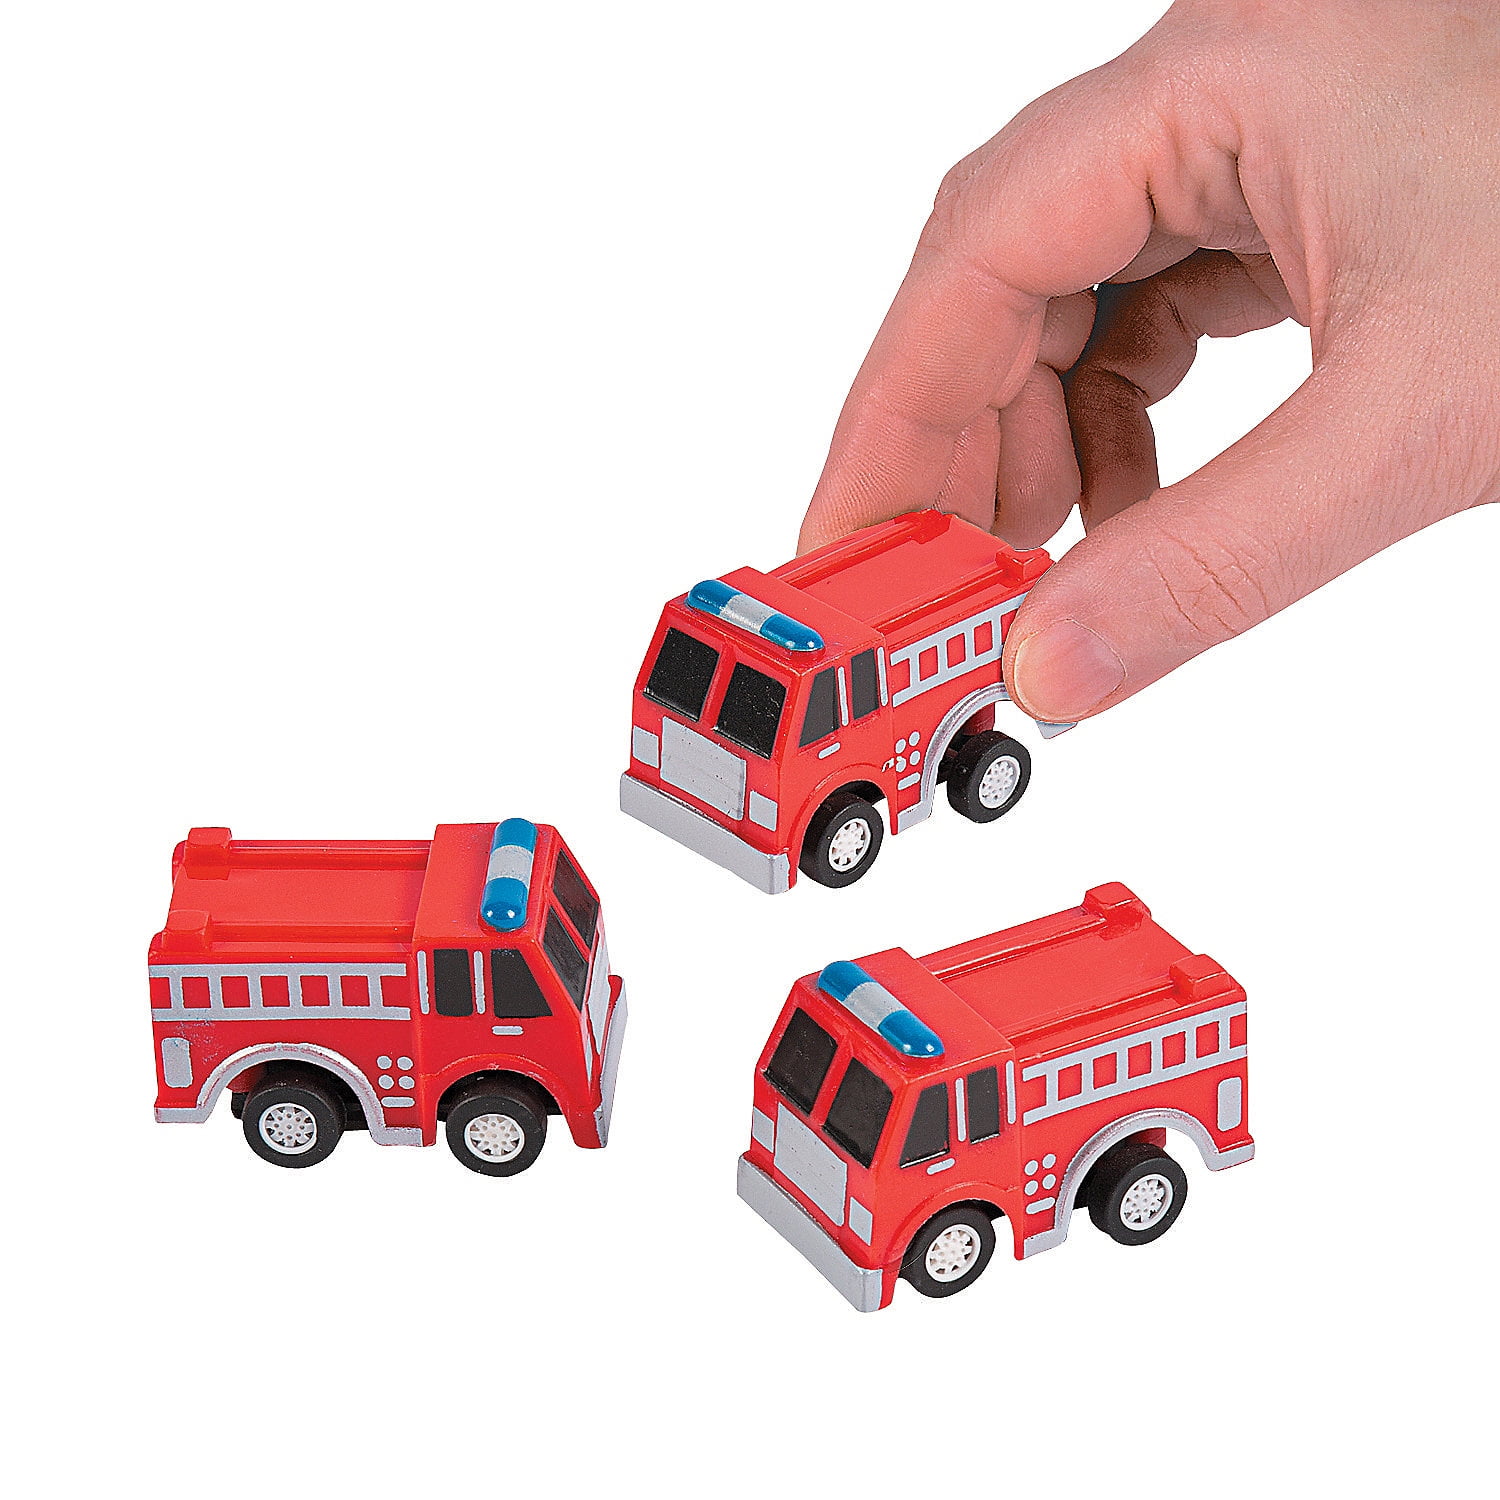 DIY Party Supplies Firefighter Firetruck Baby Shower or Birthday Party DIY Wrapper Favors and Decorations Set of 15 Fired Up Fire Truck 